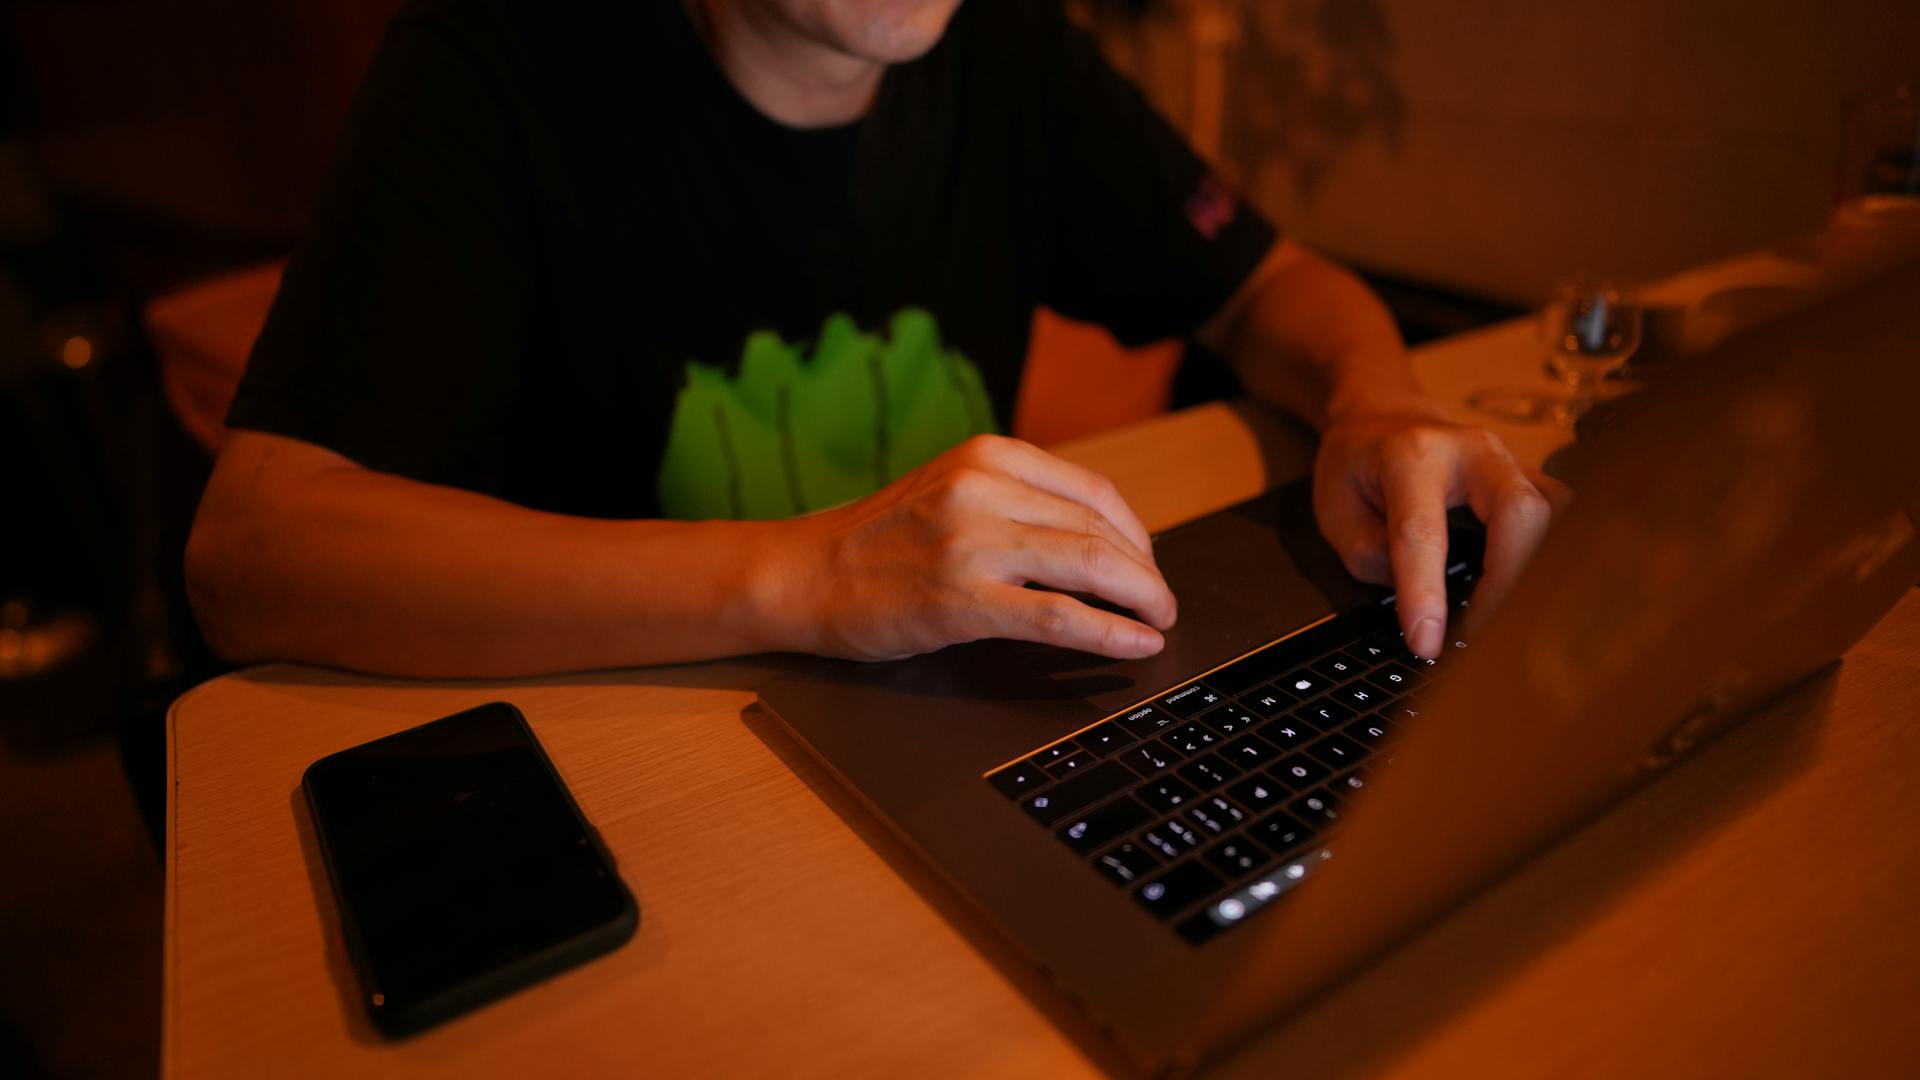 A man sitting with his laptop | Source: Pexels